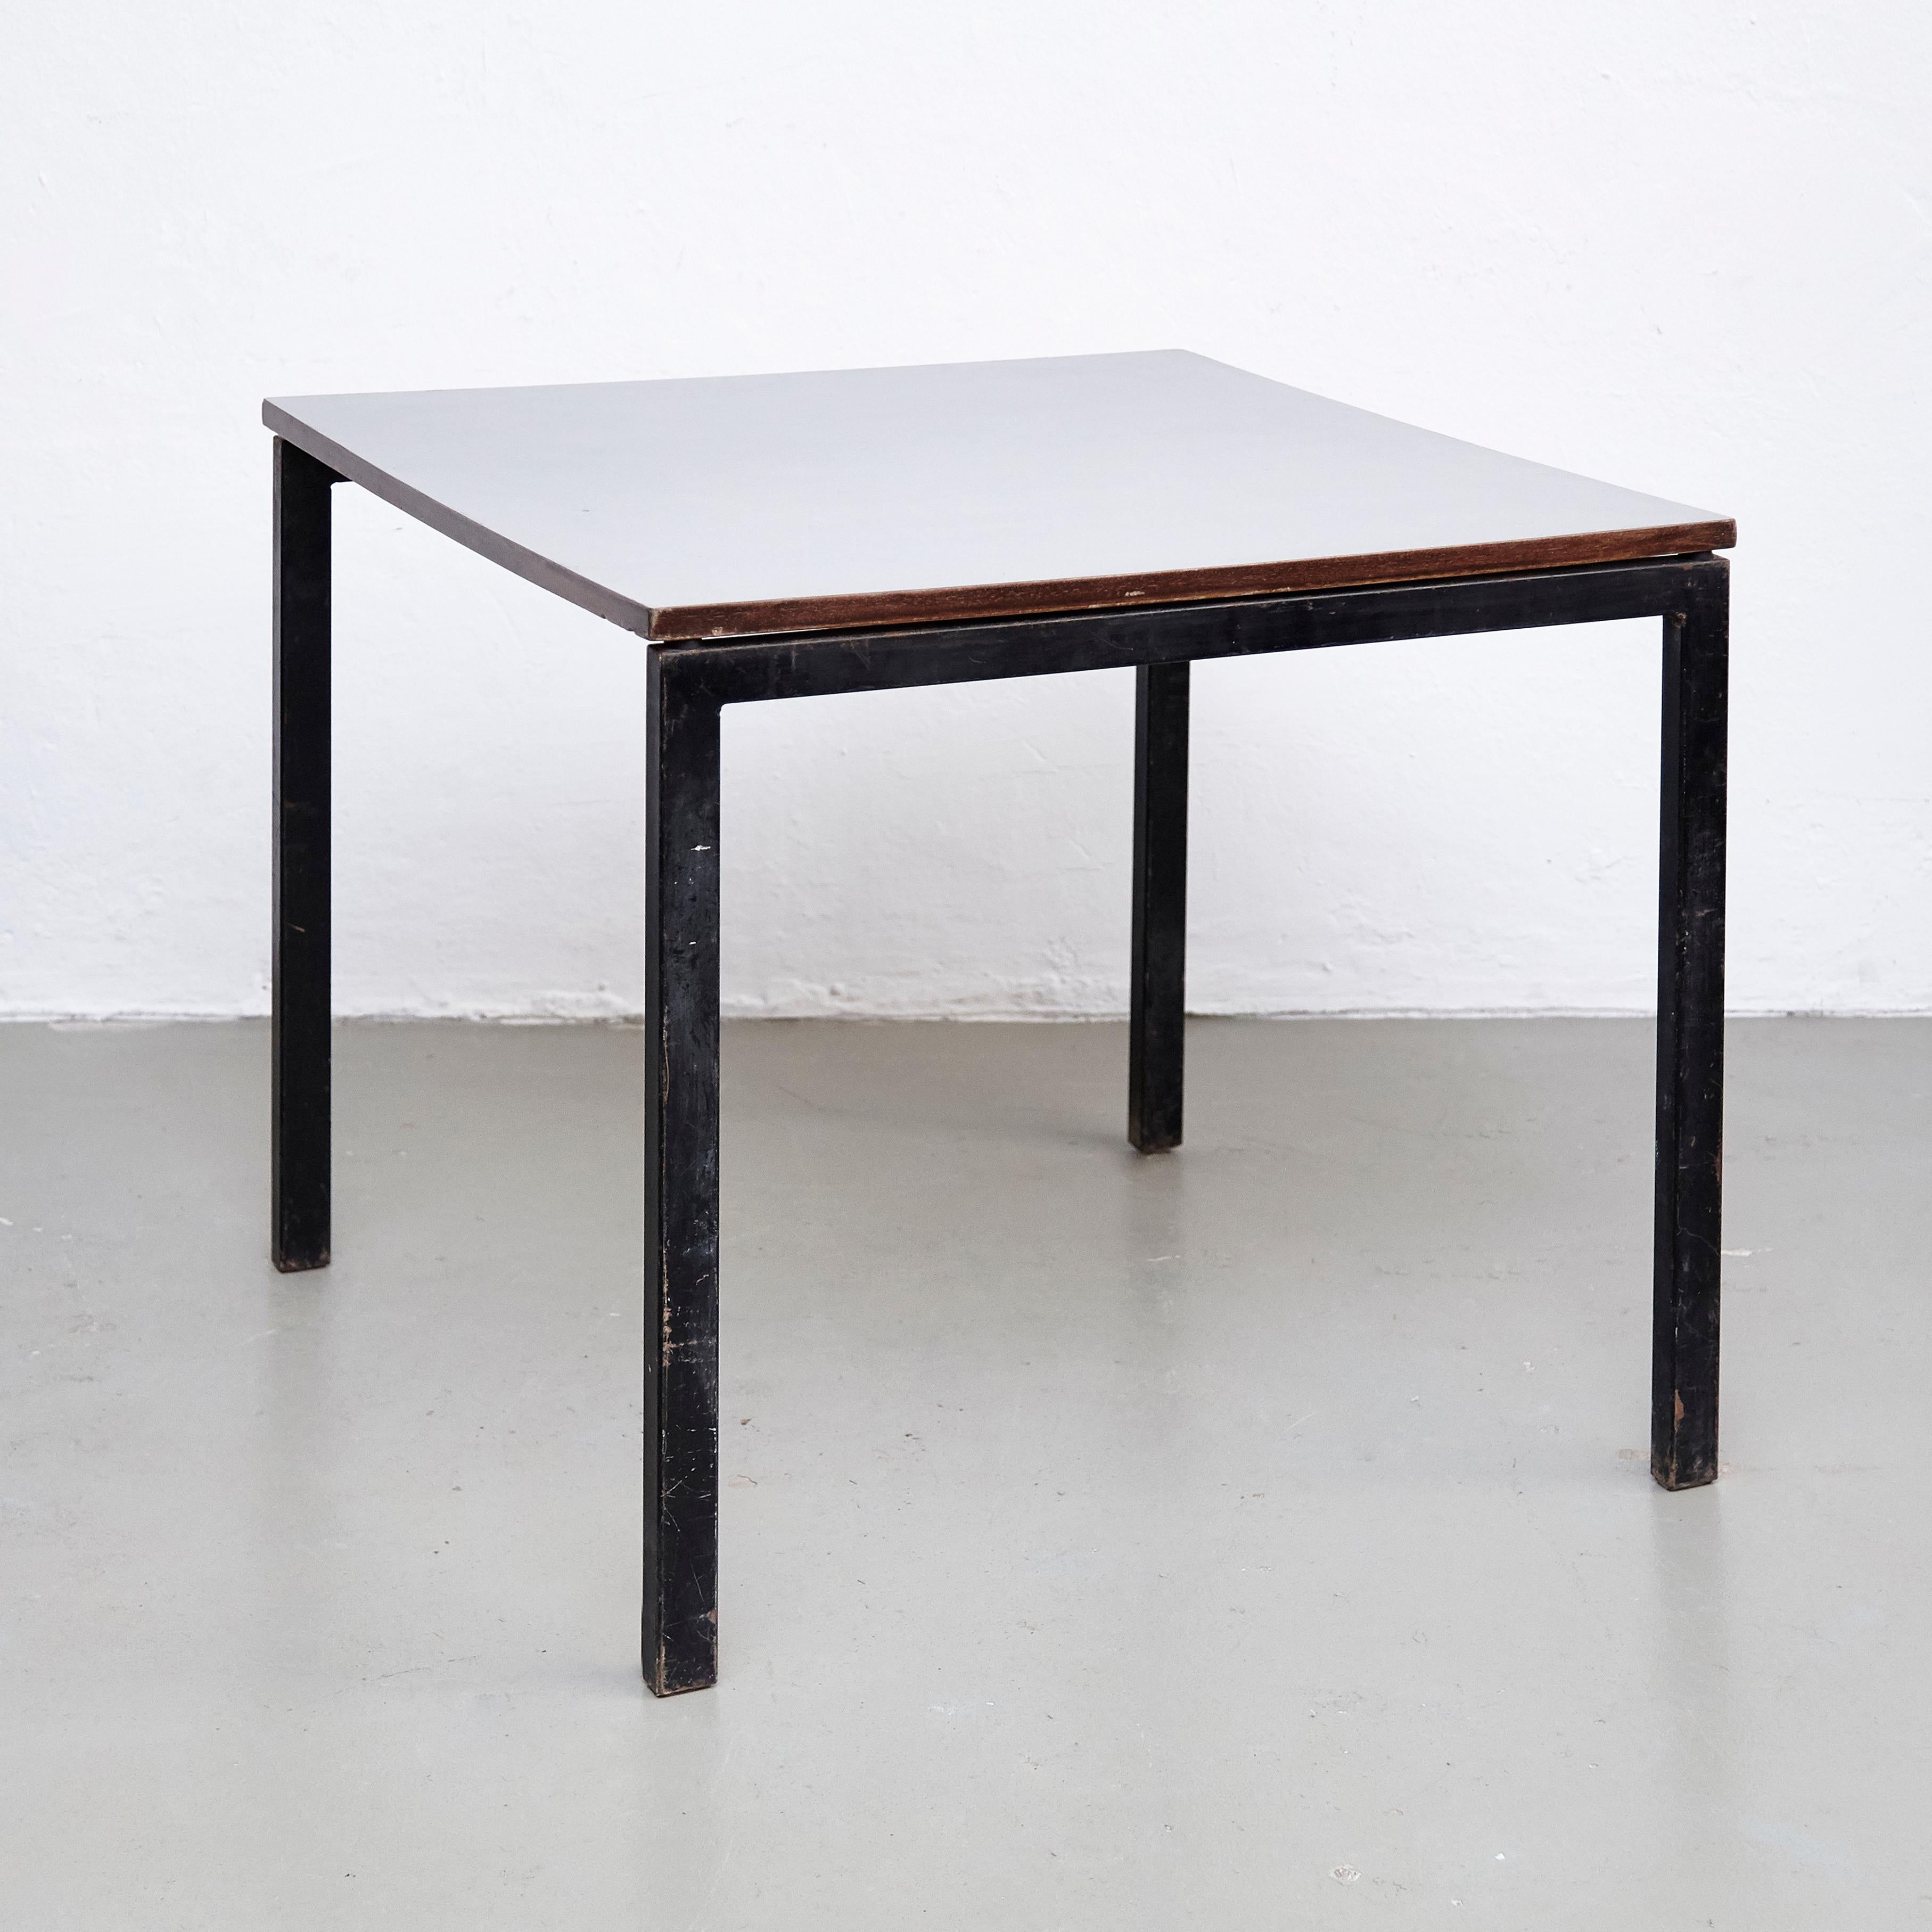 Mid-20th Century Charlotte Perriand, Mid Century Modern, Wood Formica and Metal Table, circa 1950